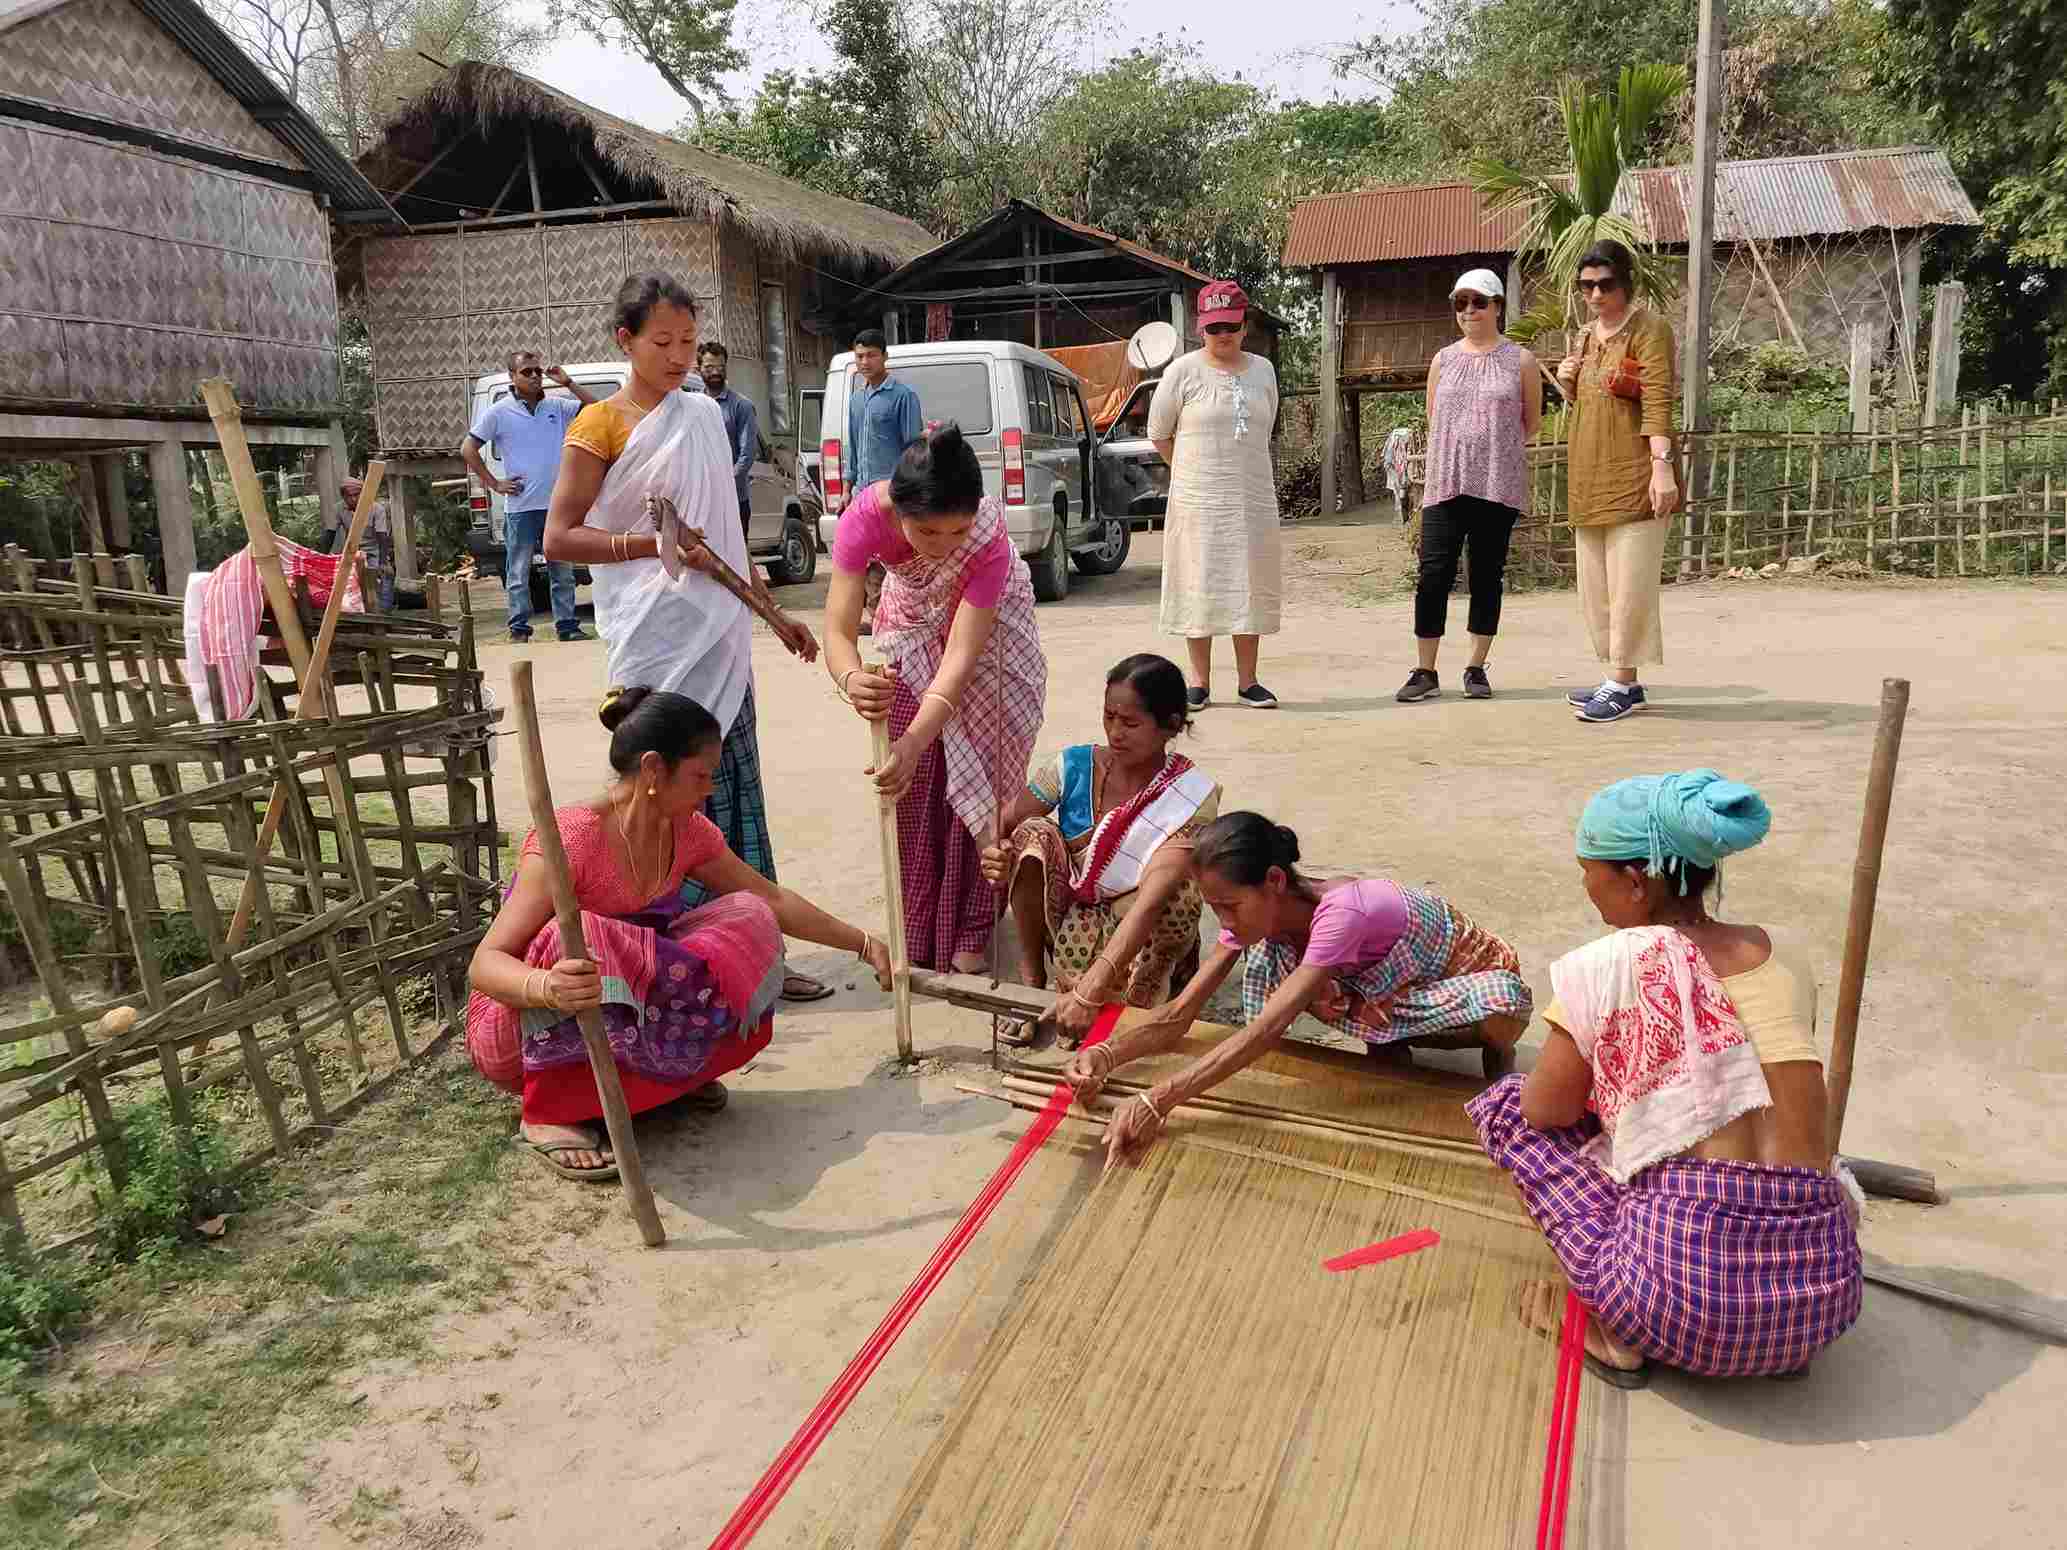 A warping demonstration in Assam for guests demonstrated by the local weavers